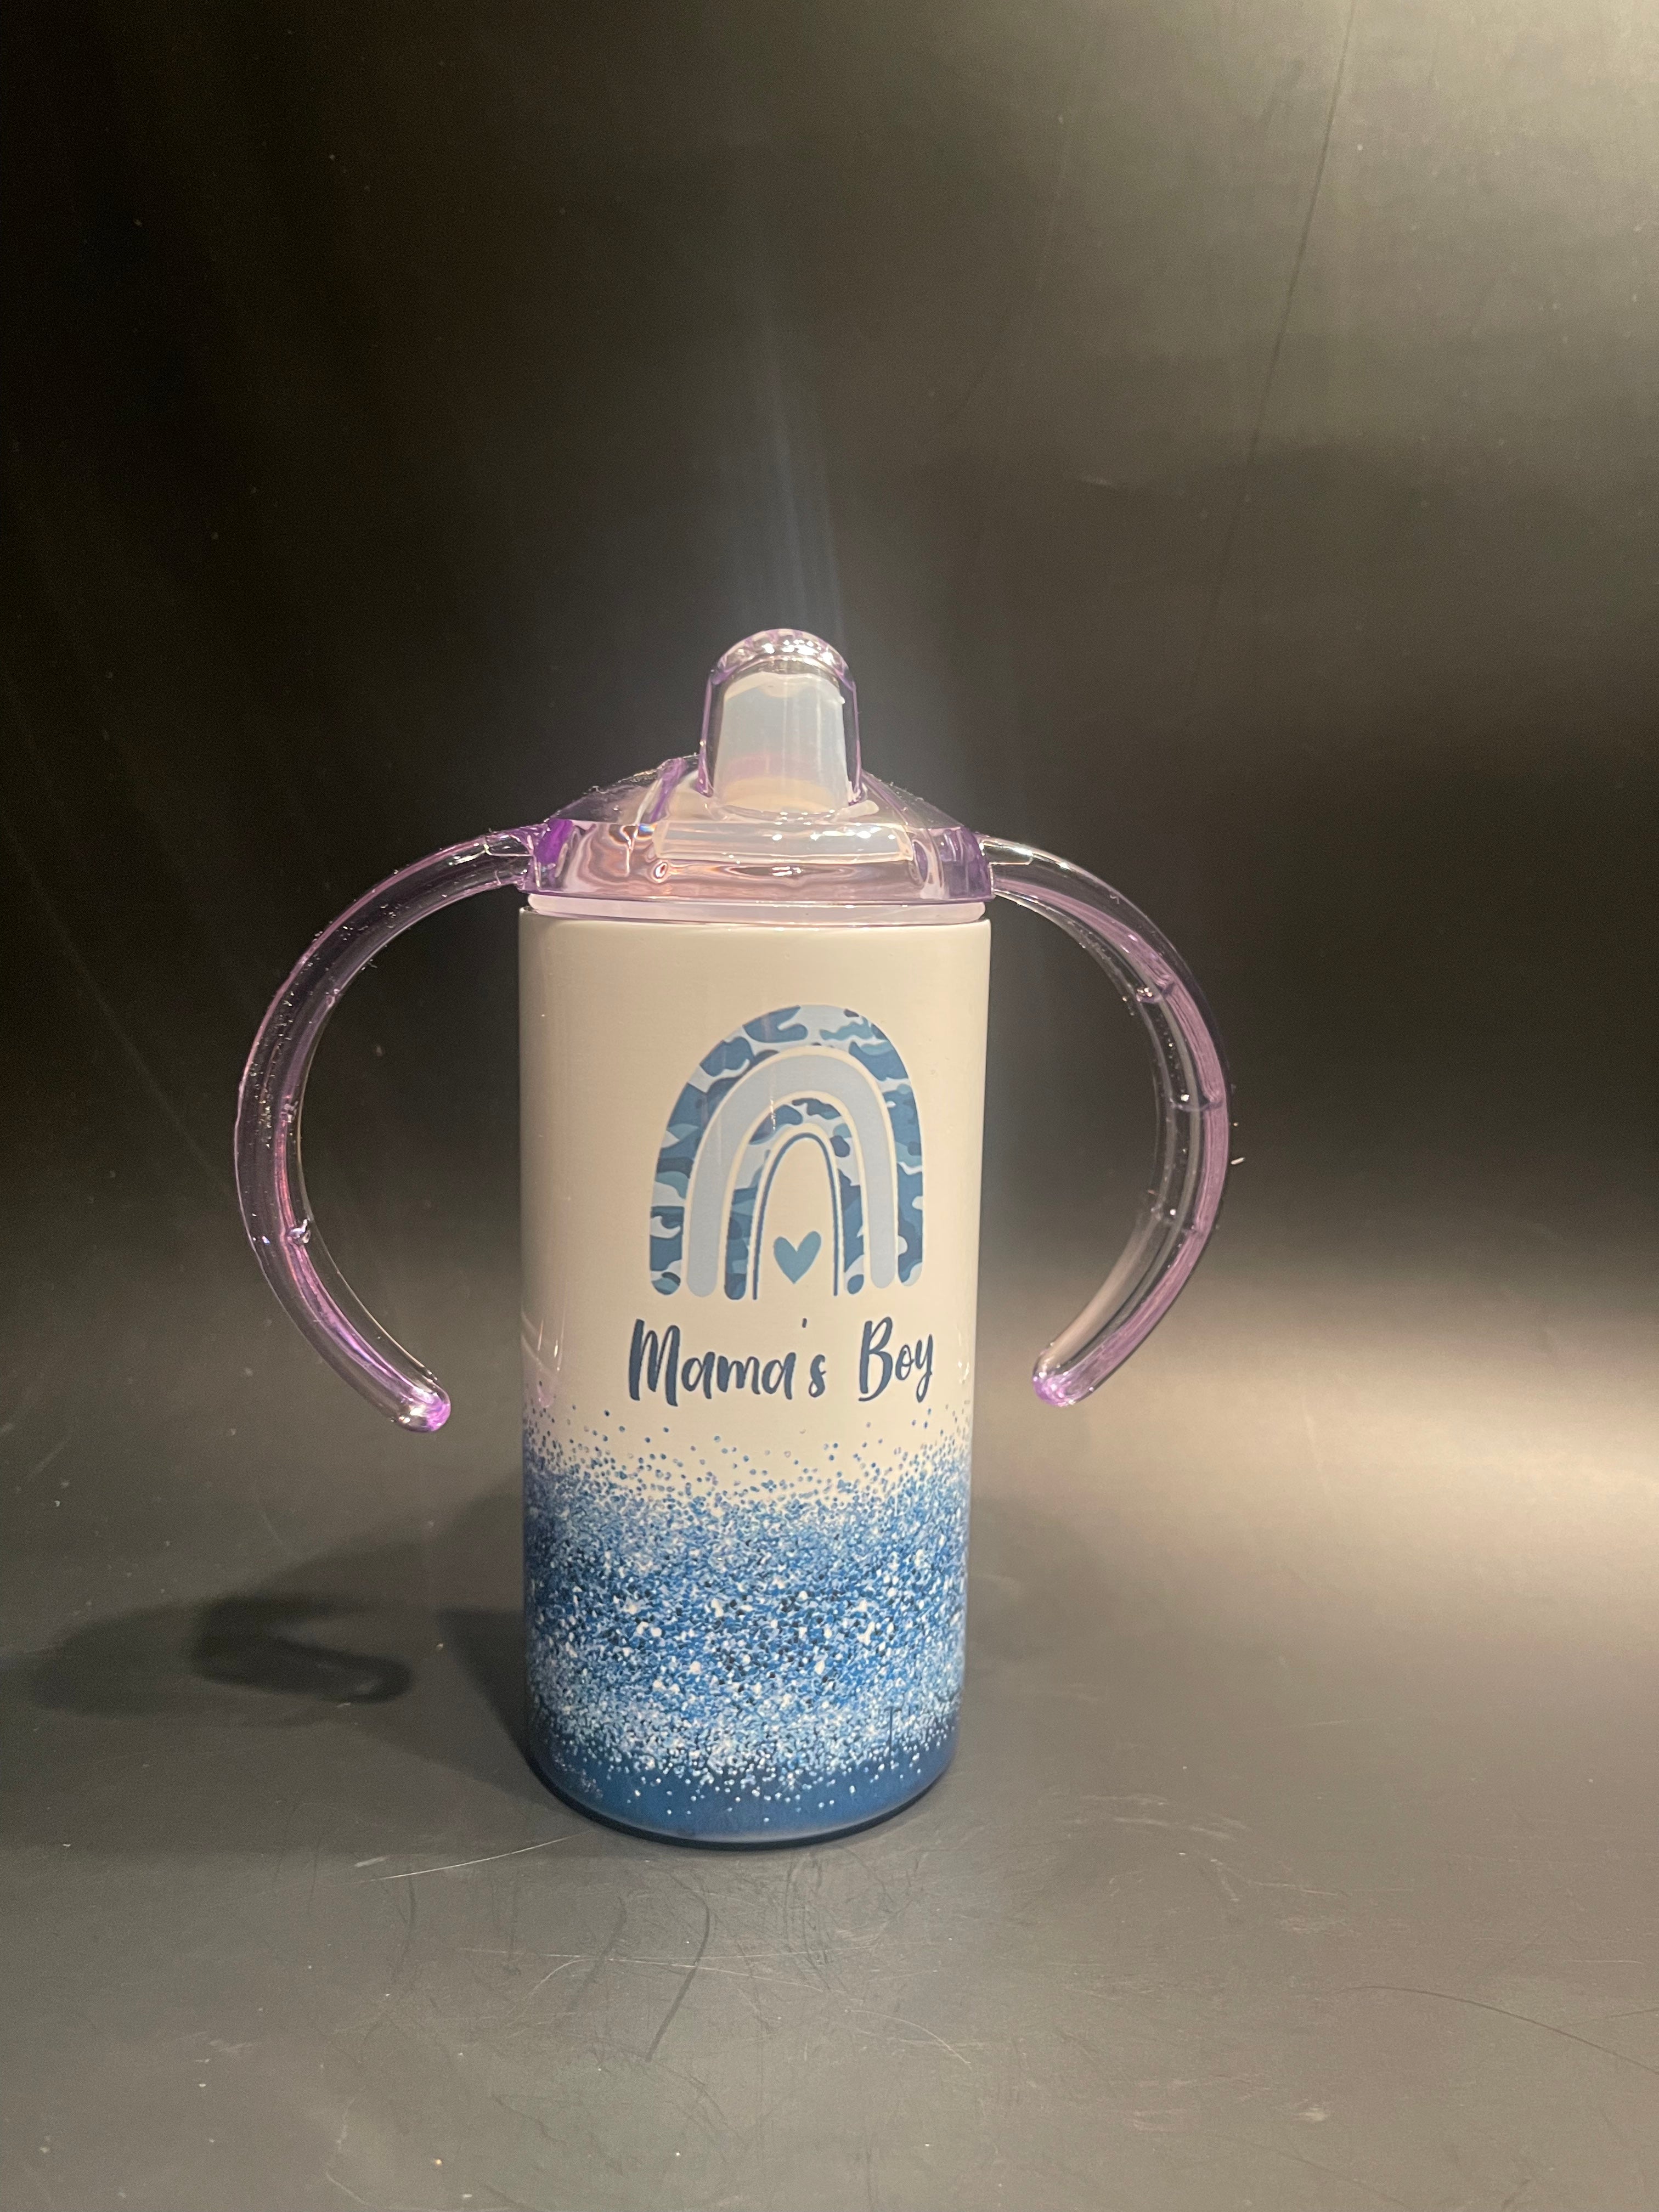 Mommy's Sippy Cup #BoyMom 12 oz. Wine Tumbler — Hats Off